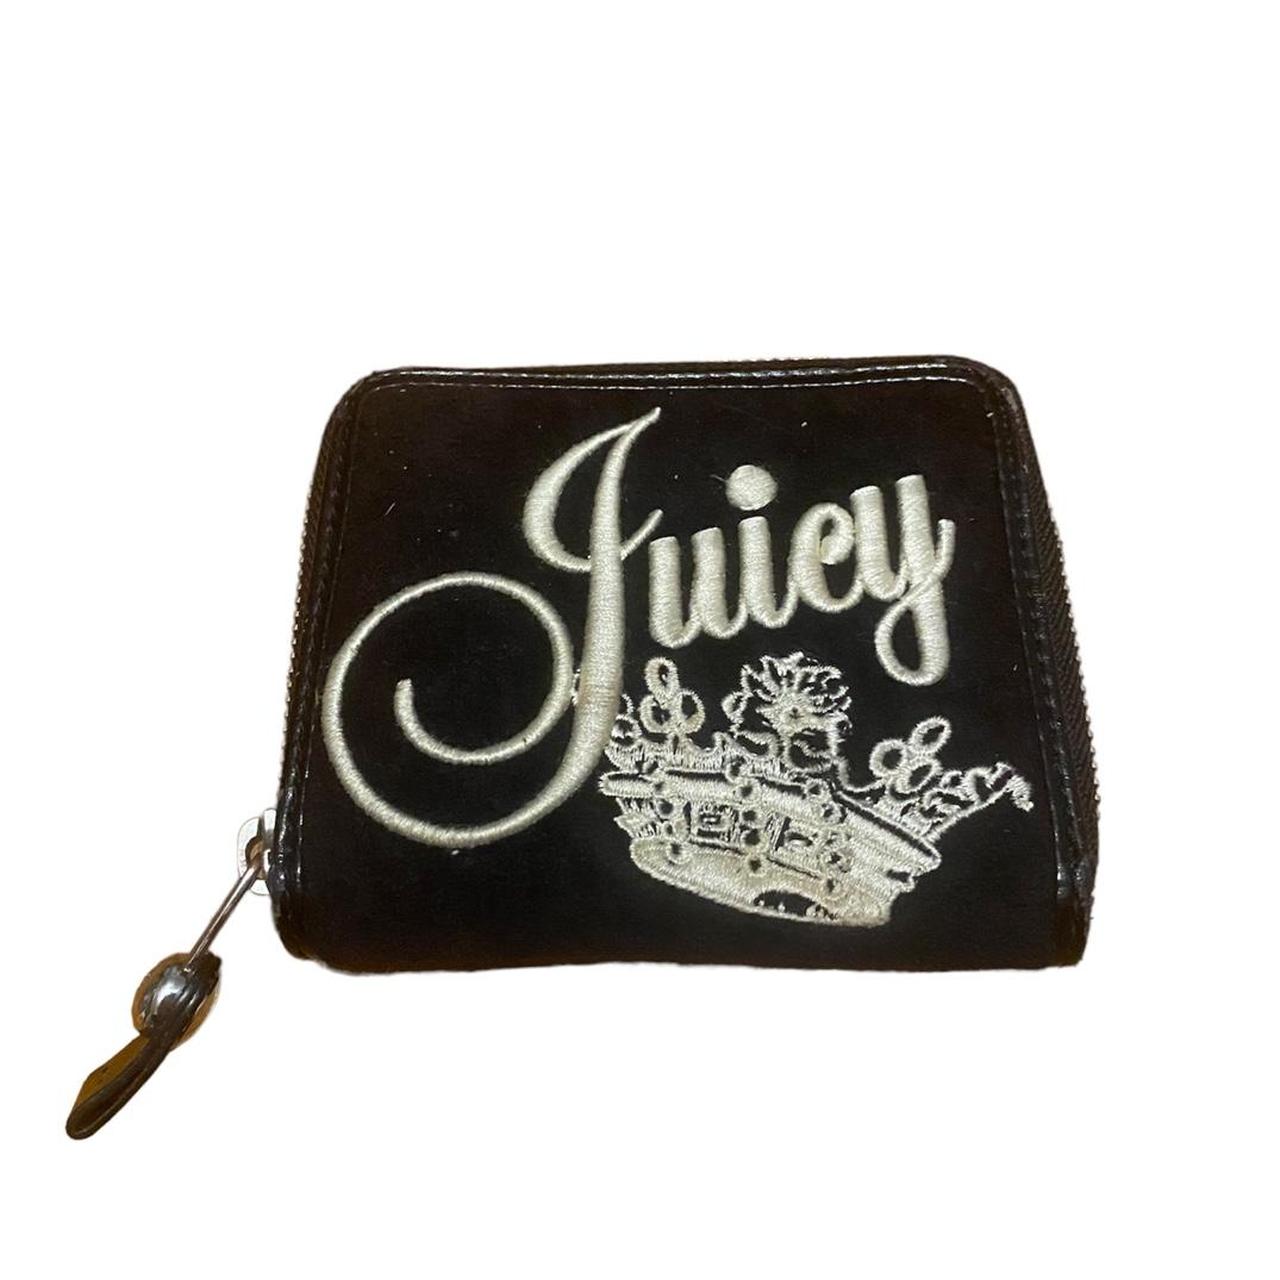 Product Image 1 - Juicy embroidered vintage wallet 
4.5”